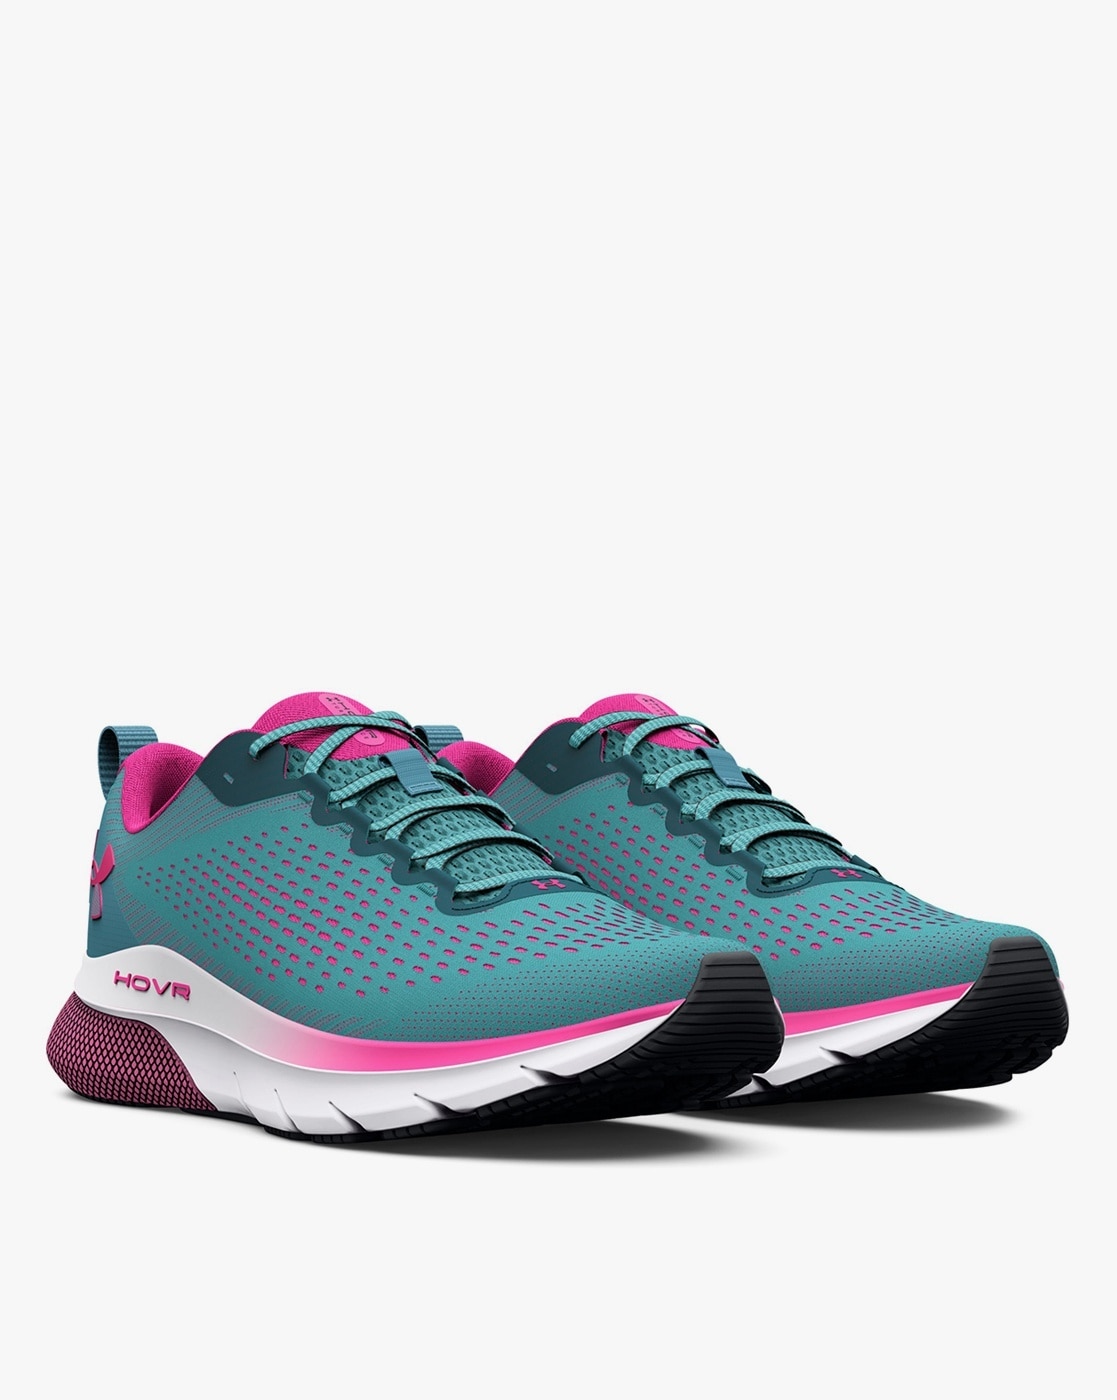 Buy Patrol Blue Sports Shoes for Women by Under Armour Online